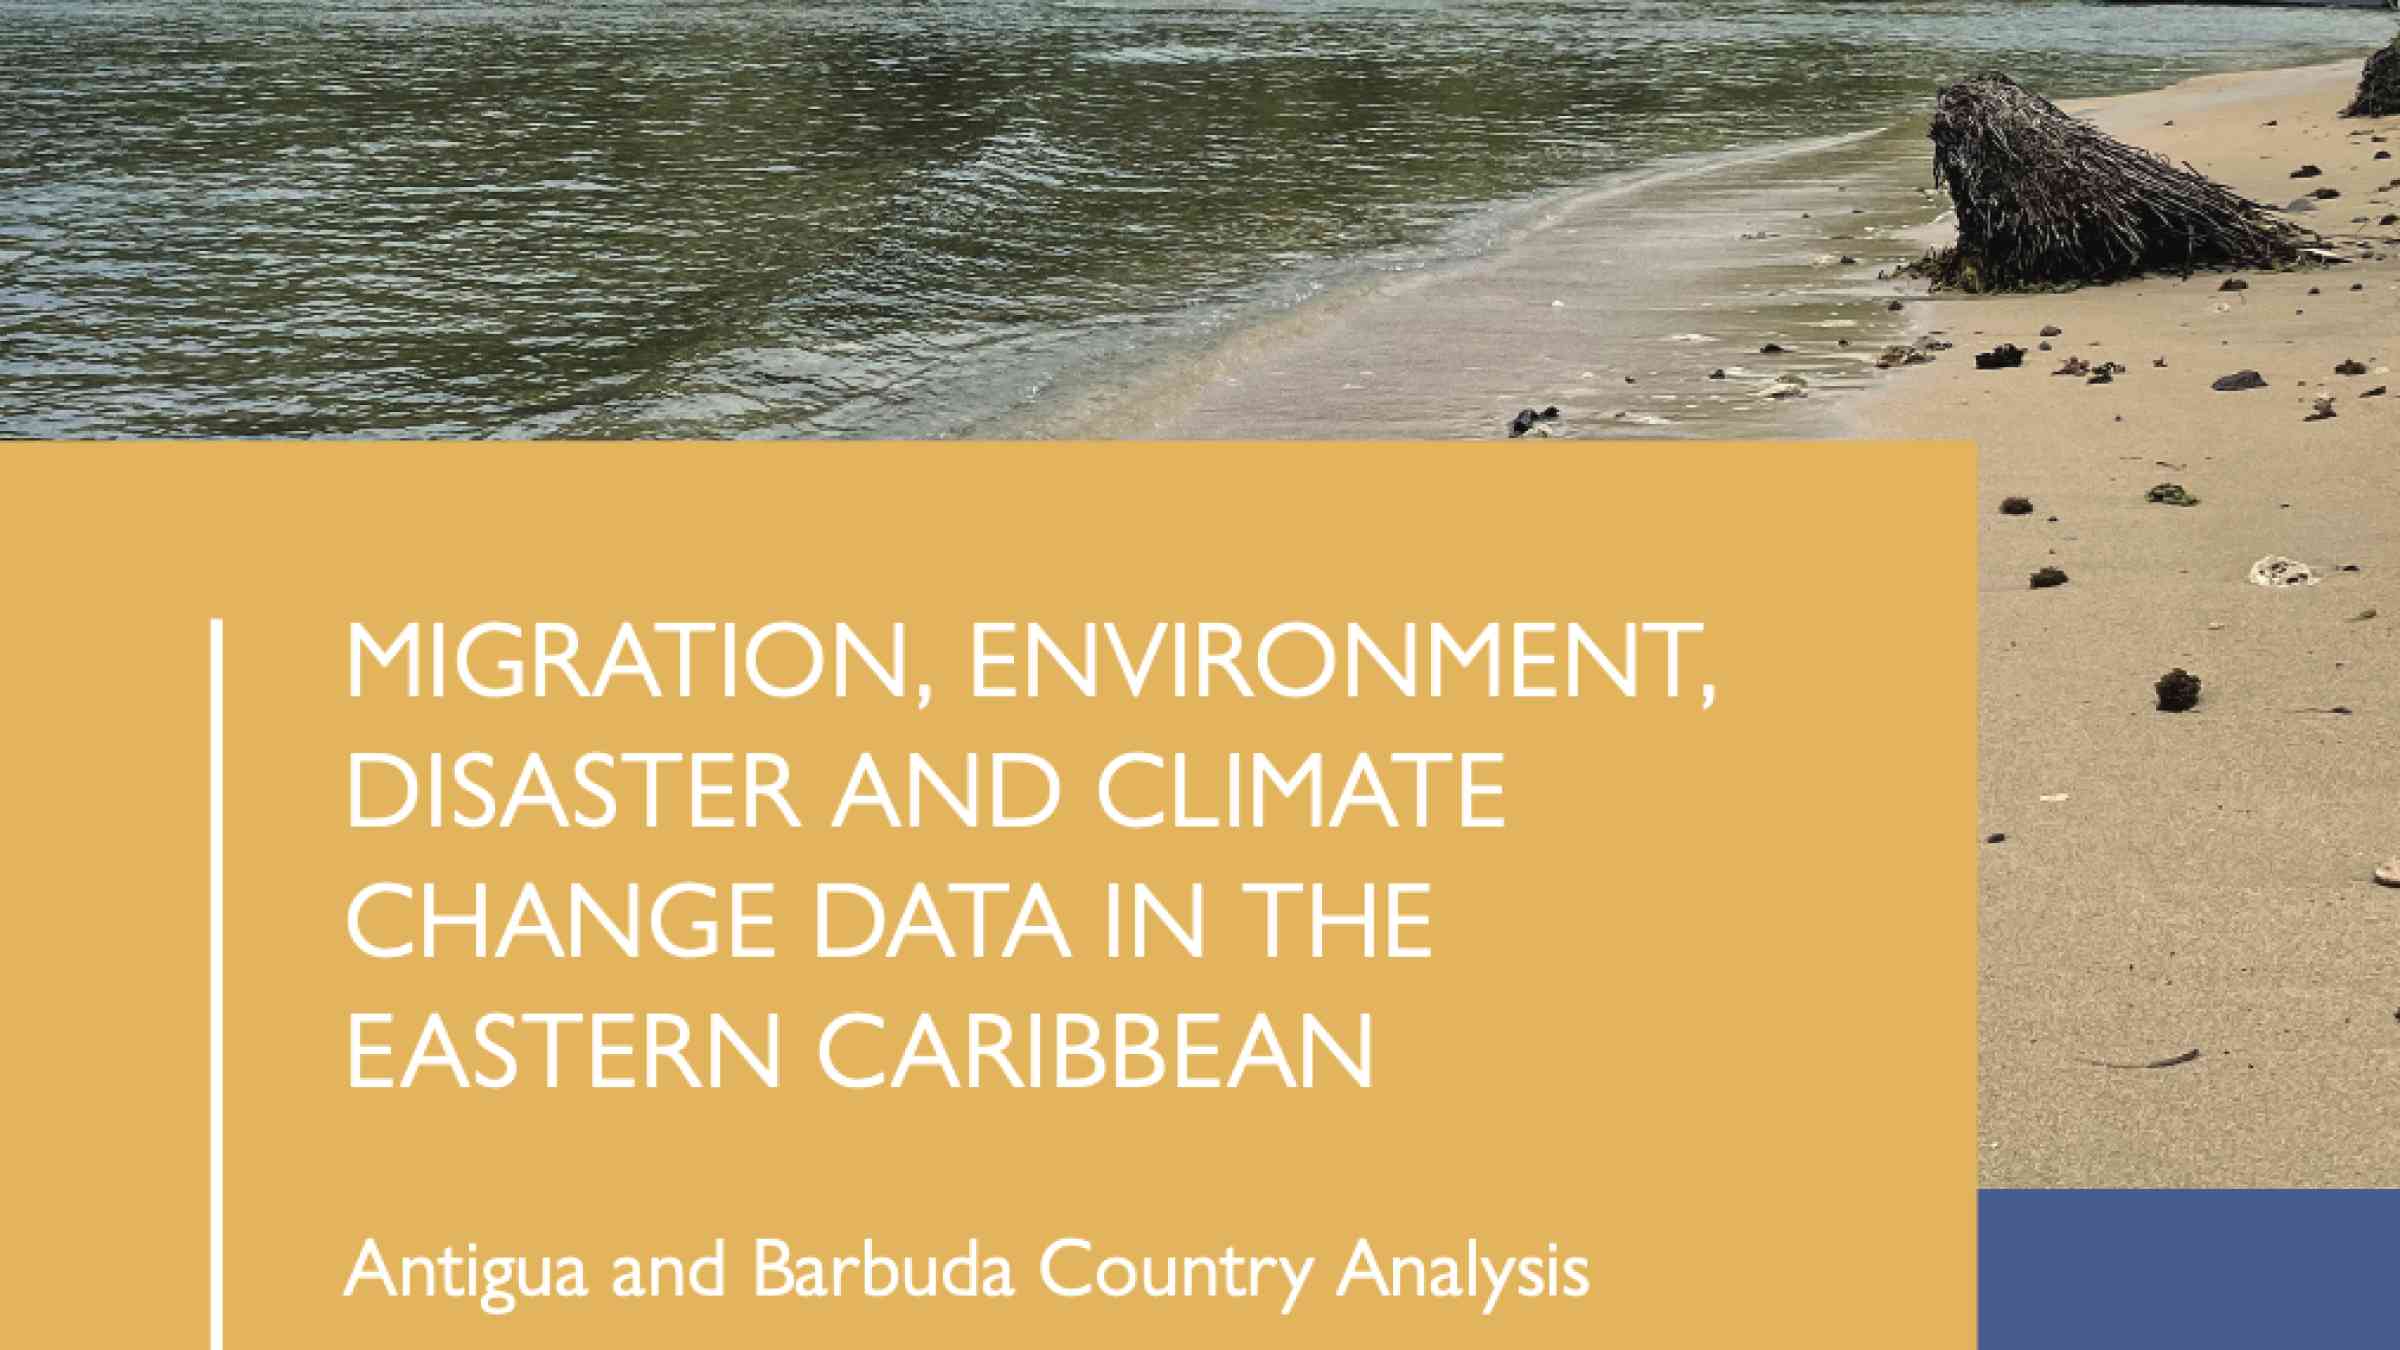 Coverage of the publication titled "Migration, Environment, Disaster and Climate Change Data in the Eastern Caribbean-Antigua and Barbuda Country Analysis"